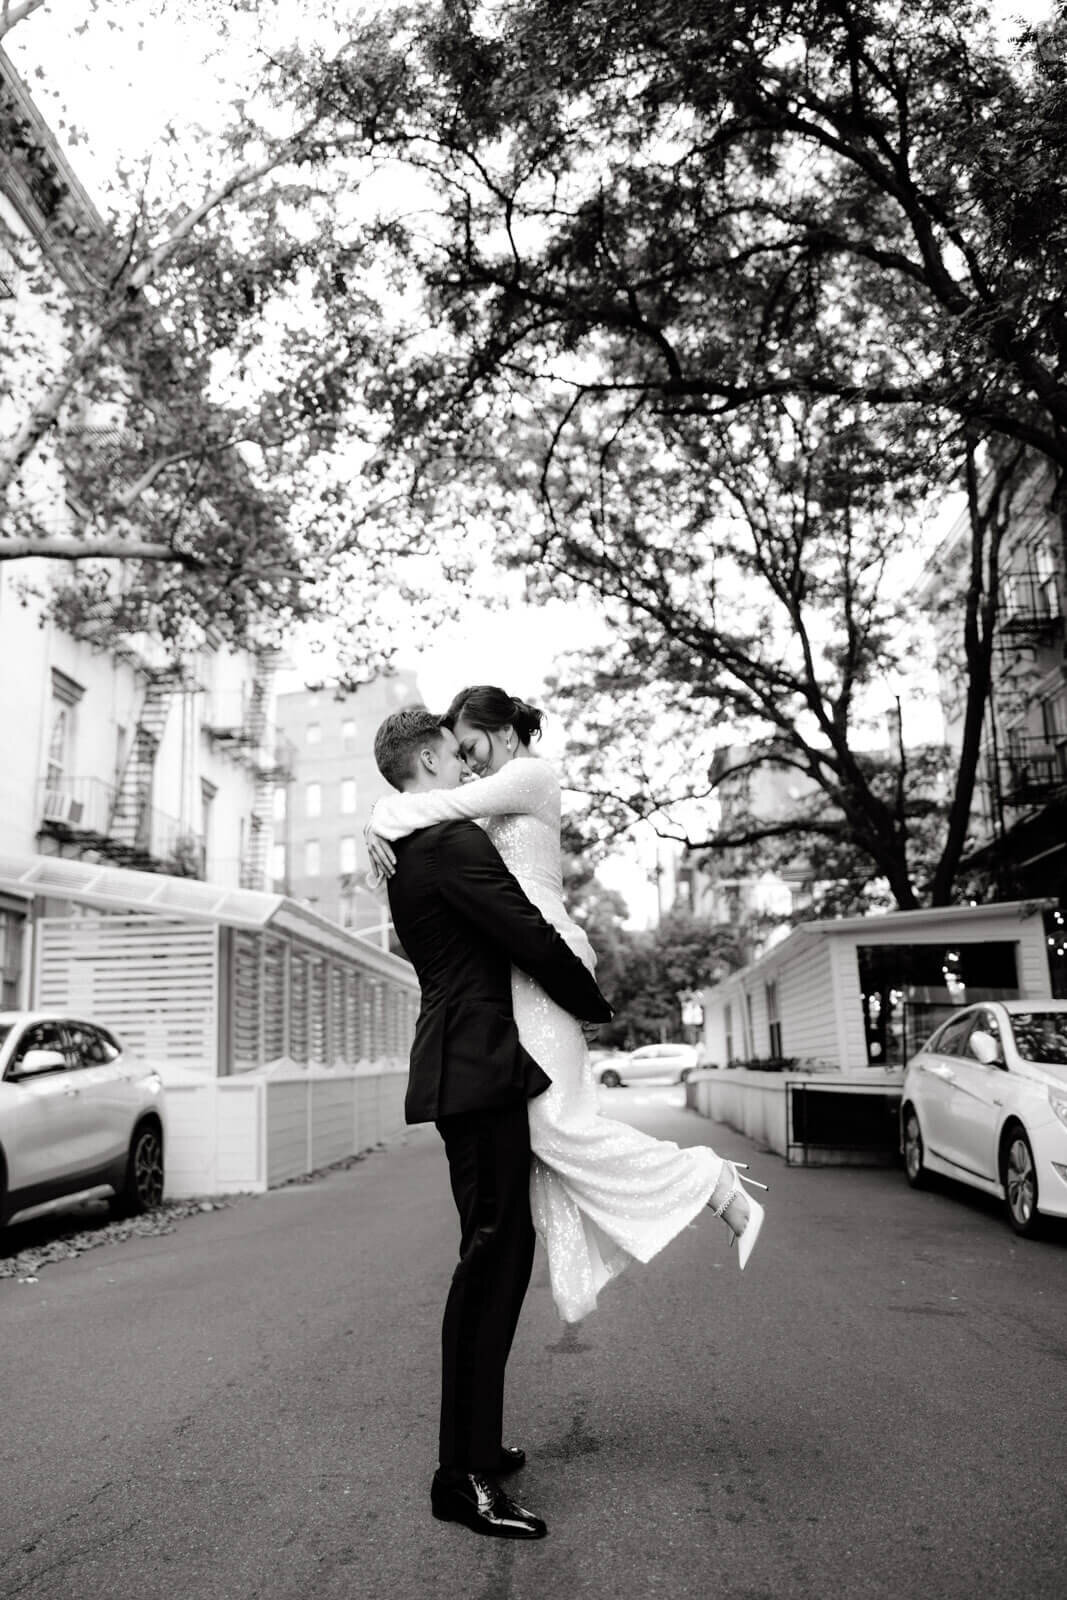 The groom is carrying the bride, touching heads, in the middle of a street in West Village, NYC. Image by Jenny Fu Studio